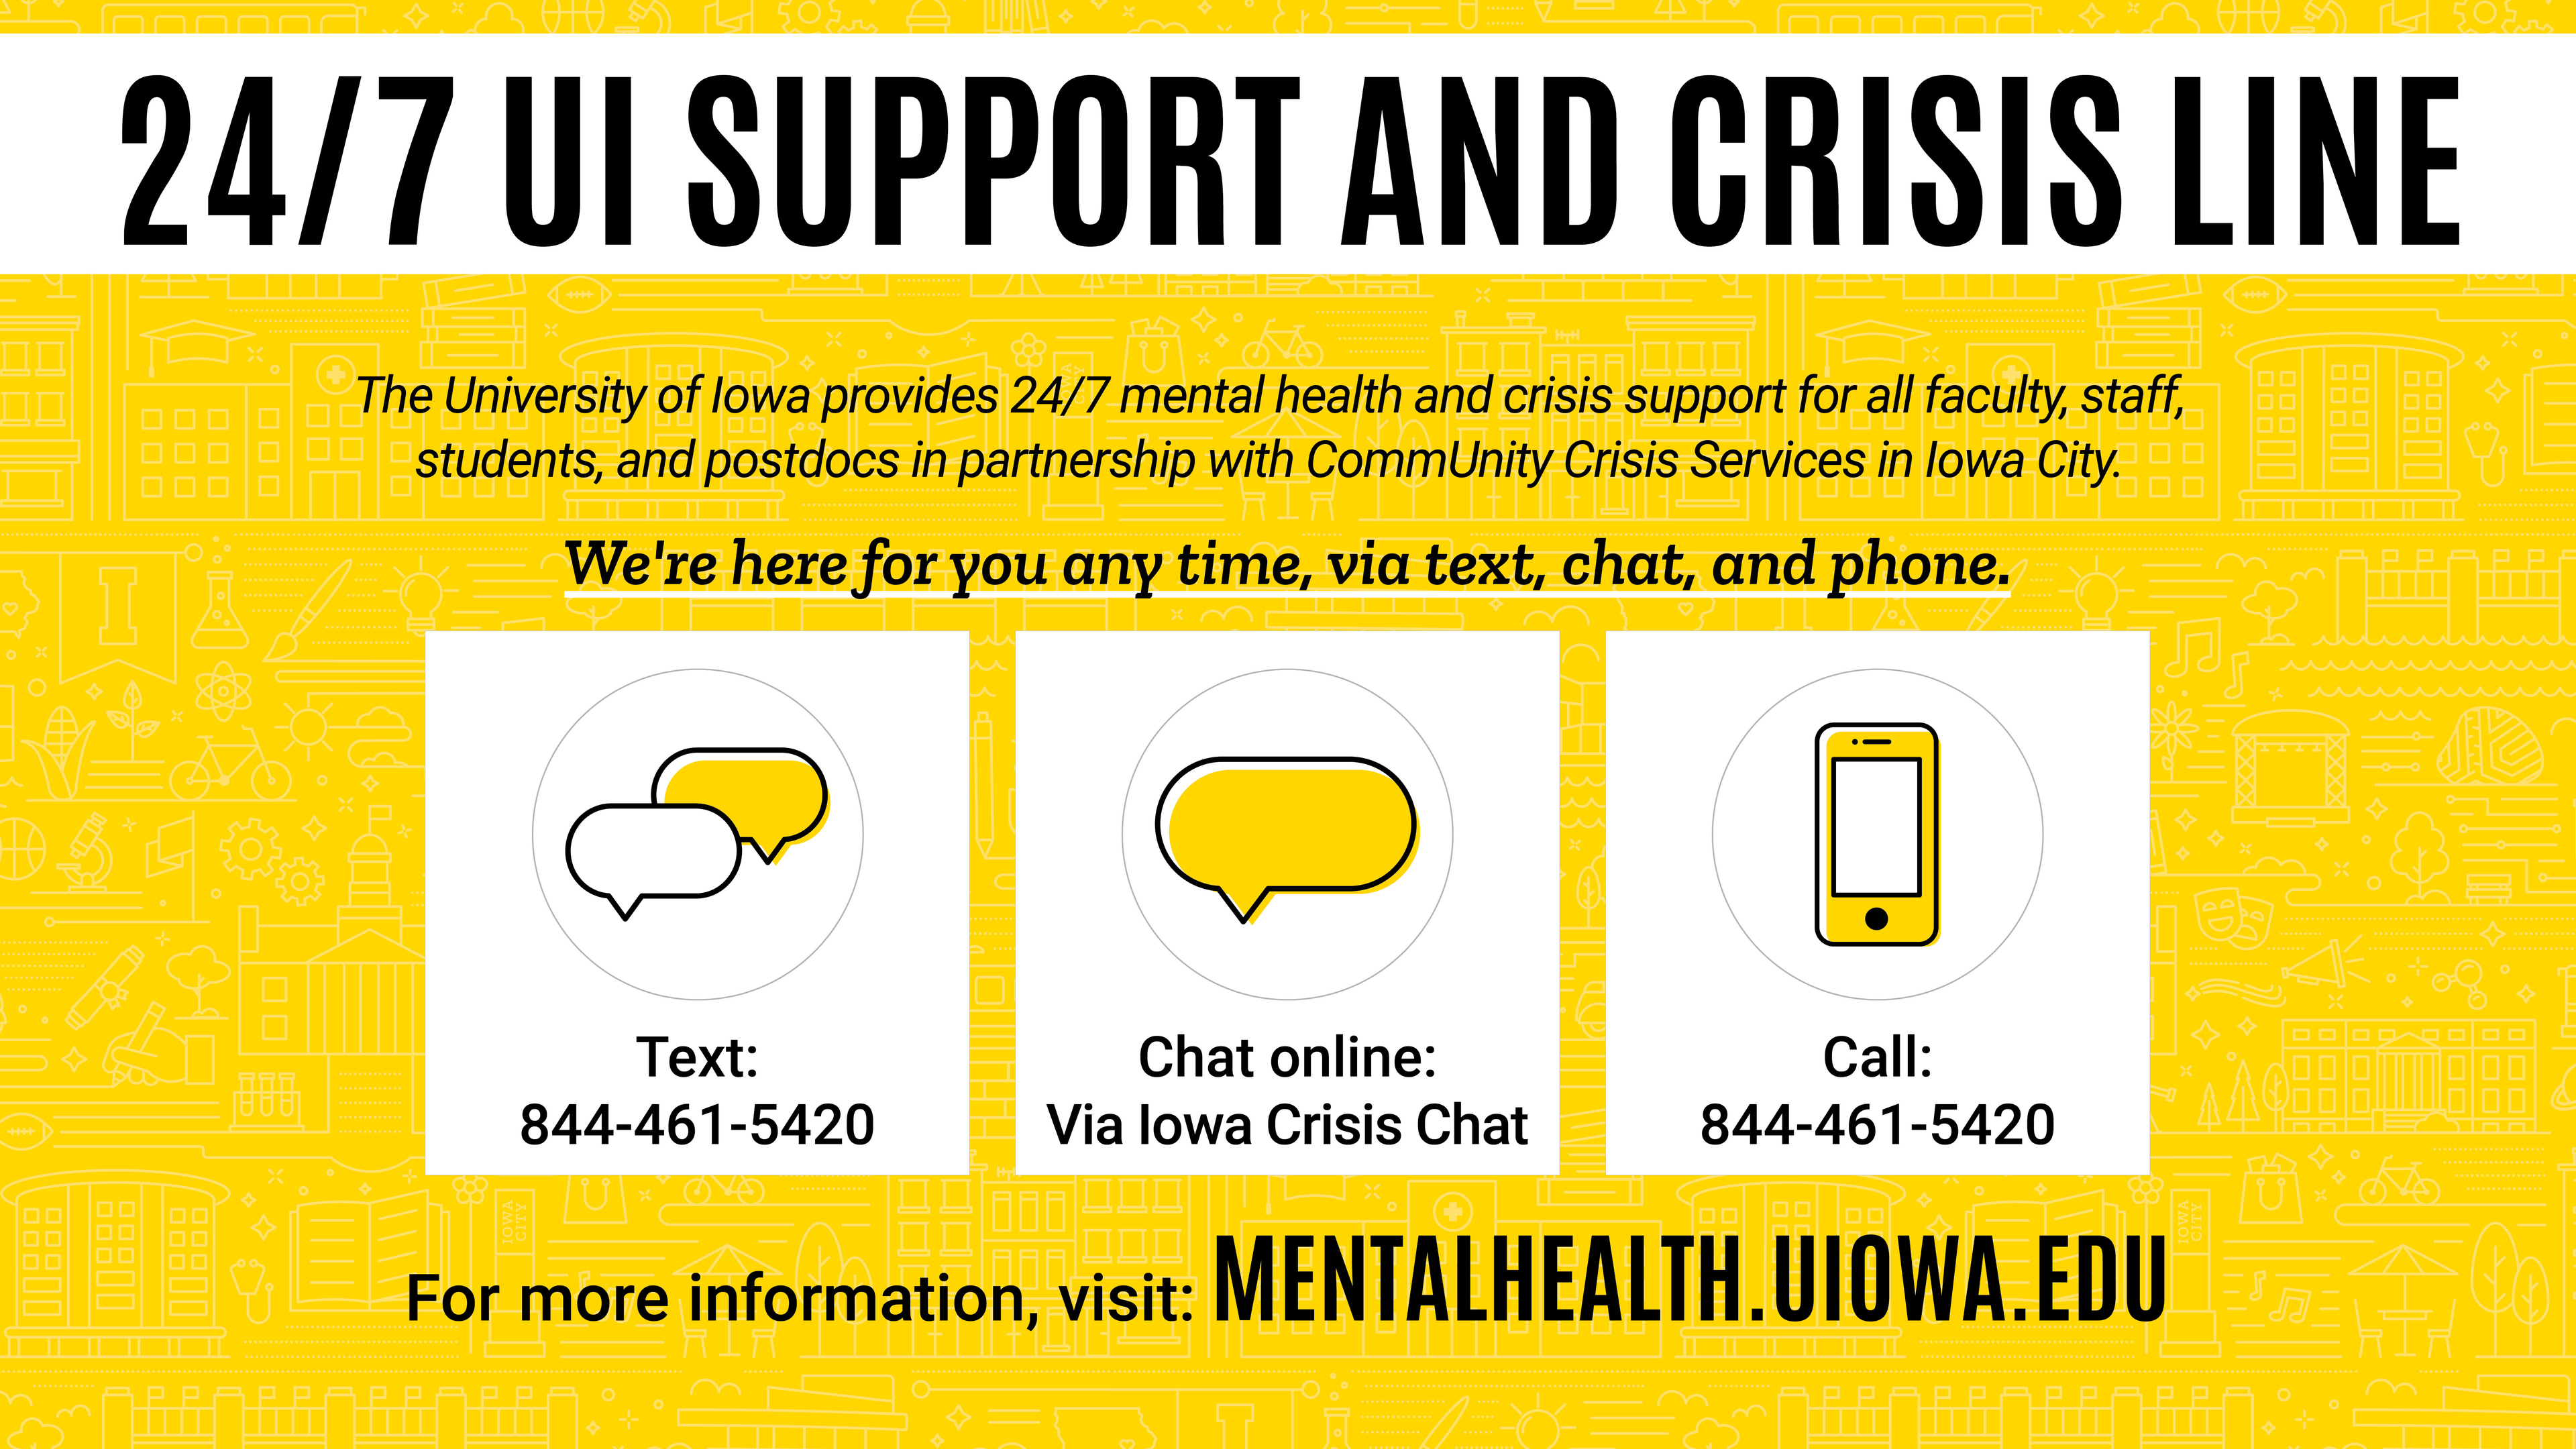 UI Support and Crisis Line. Visit mentalhealth.uiowa.edu for more information.